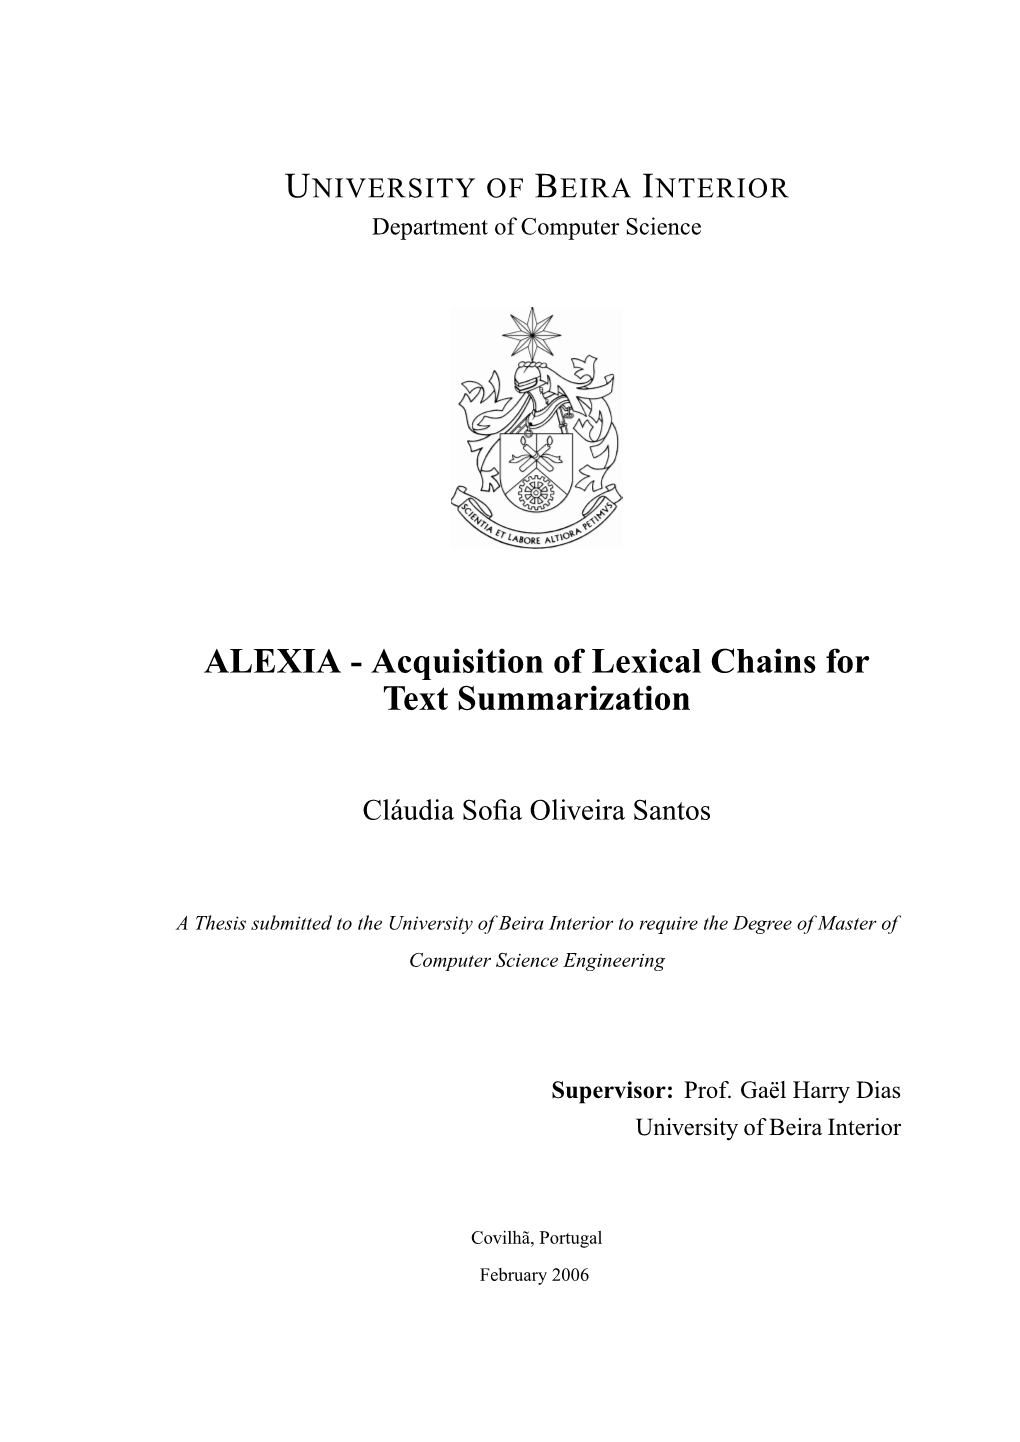 ALEXIA - Acquisition of Lexical Chains for Text Summarization